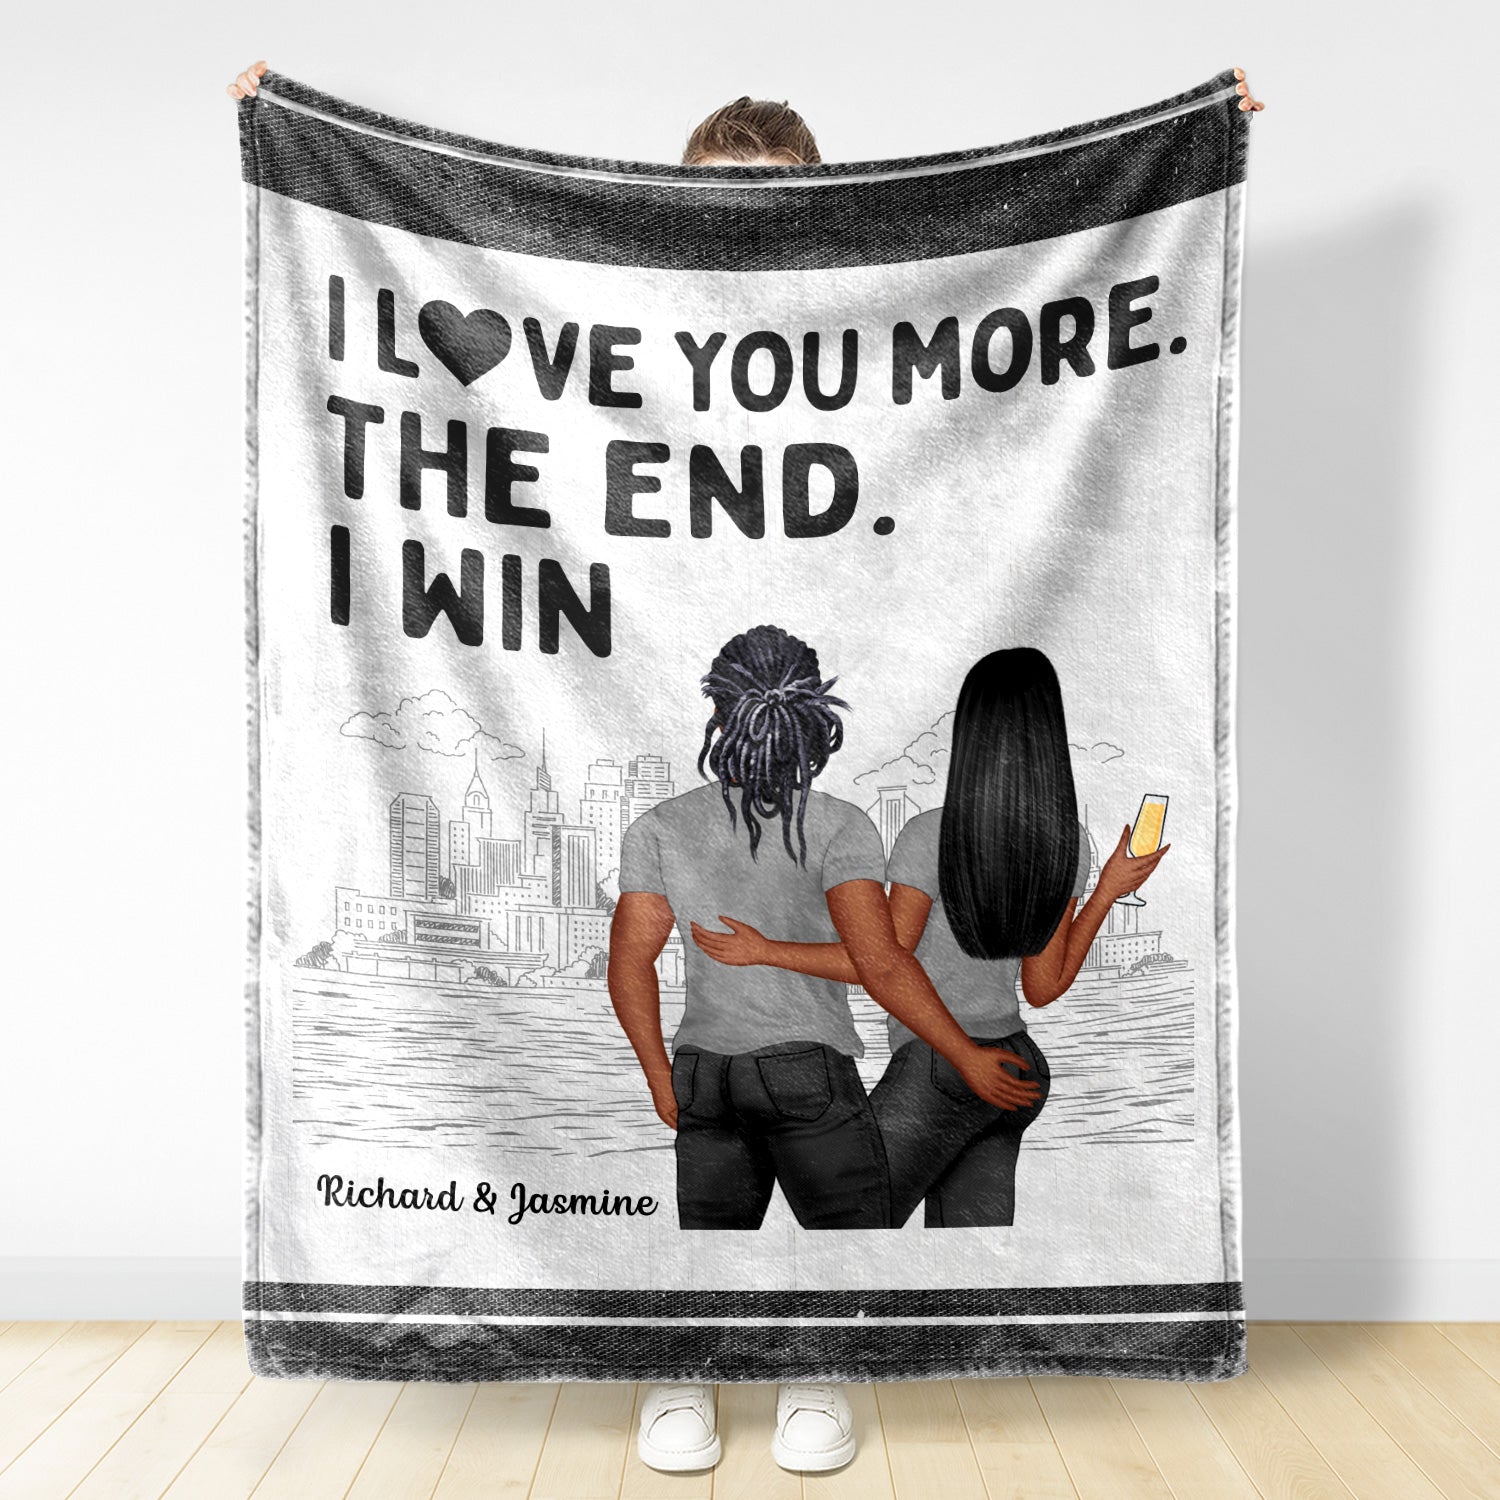 Couple I Love You More The End - Personalized Custom Fleece Blanket